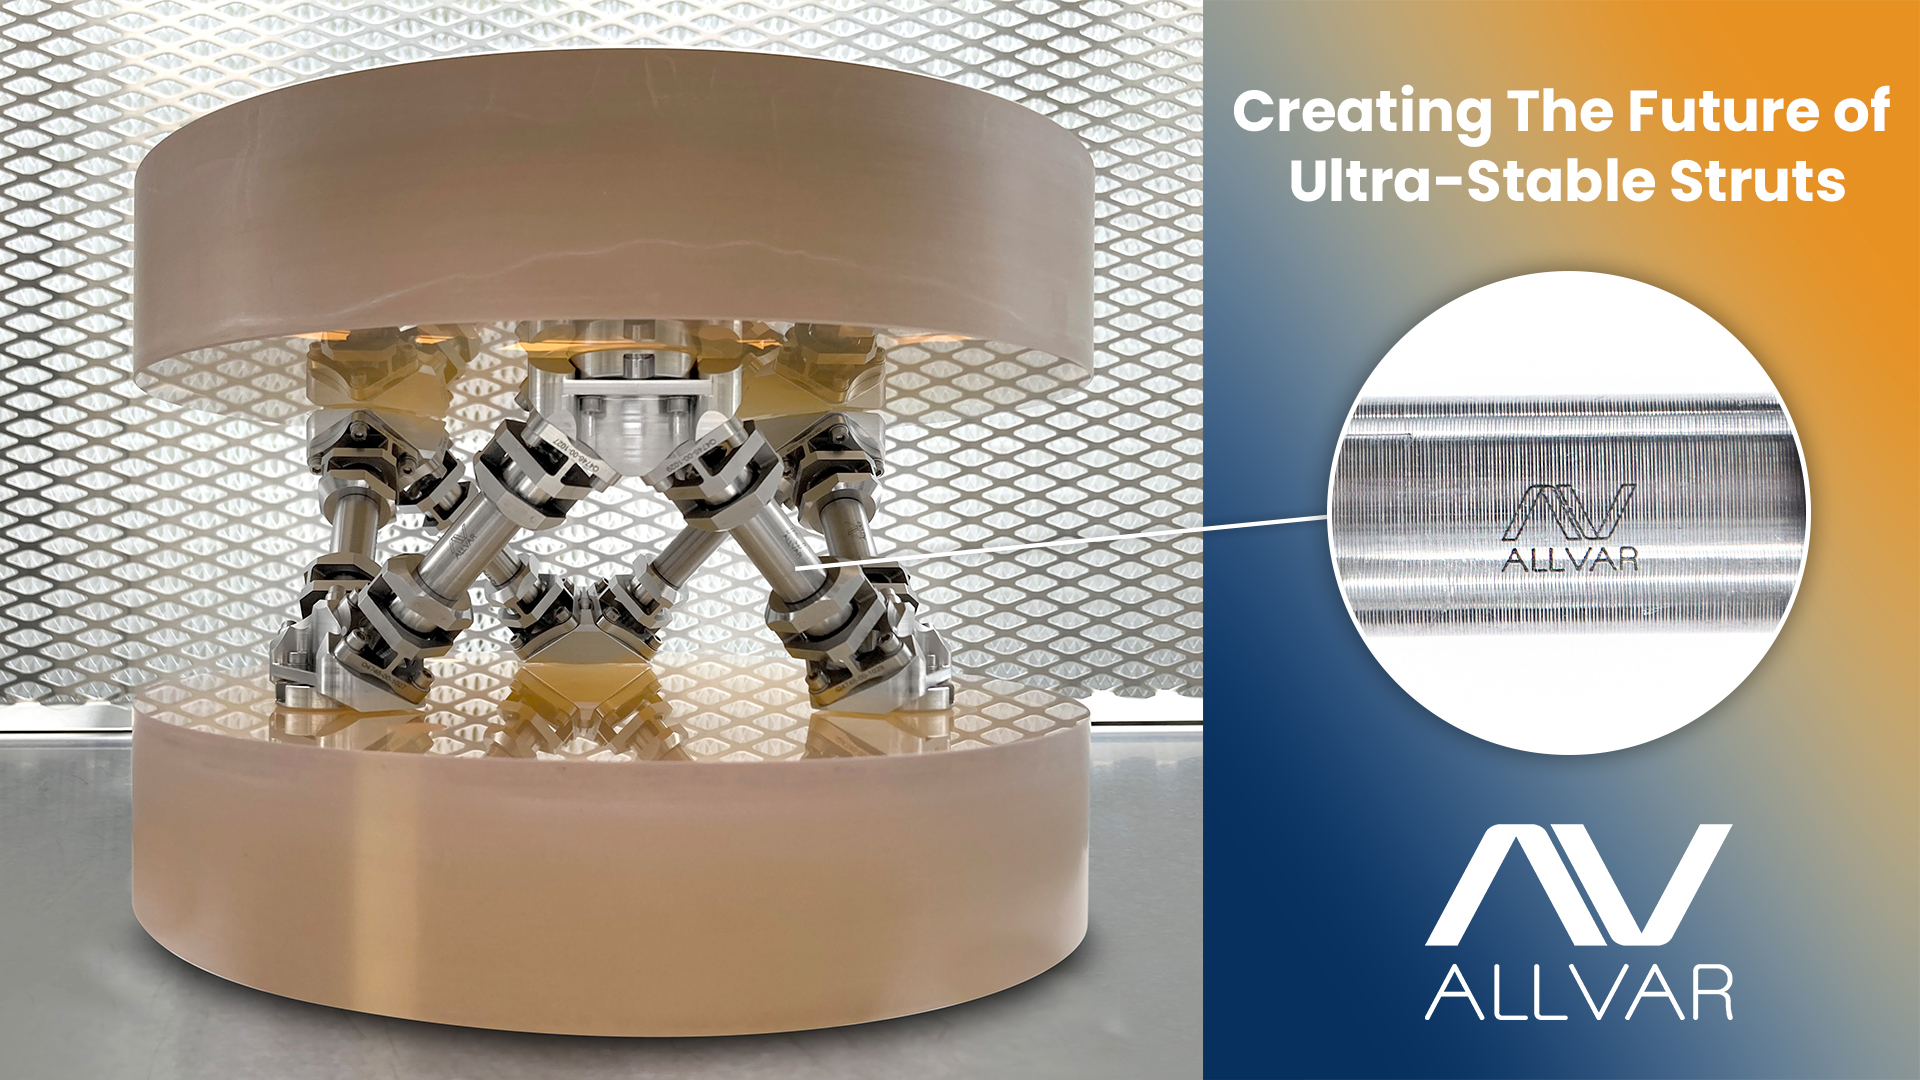 Telescope Hexapod Assembly with ALLVAR Alloy ultra-stable struts shown. A zoomed in image is shown on the negative CTE portion of the strut. The Words Creating the future of ultra-stable struts is shown above the image.